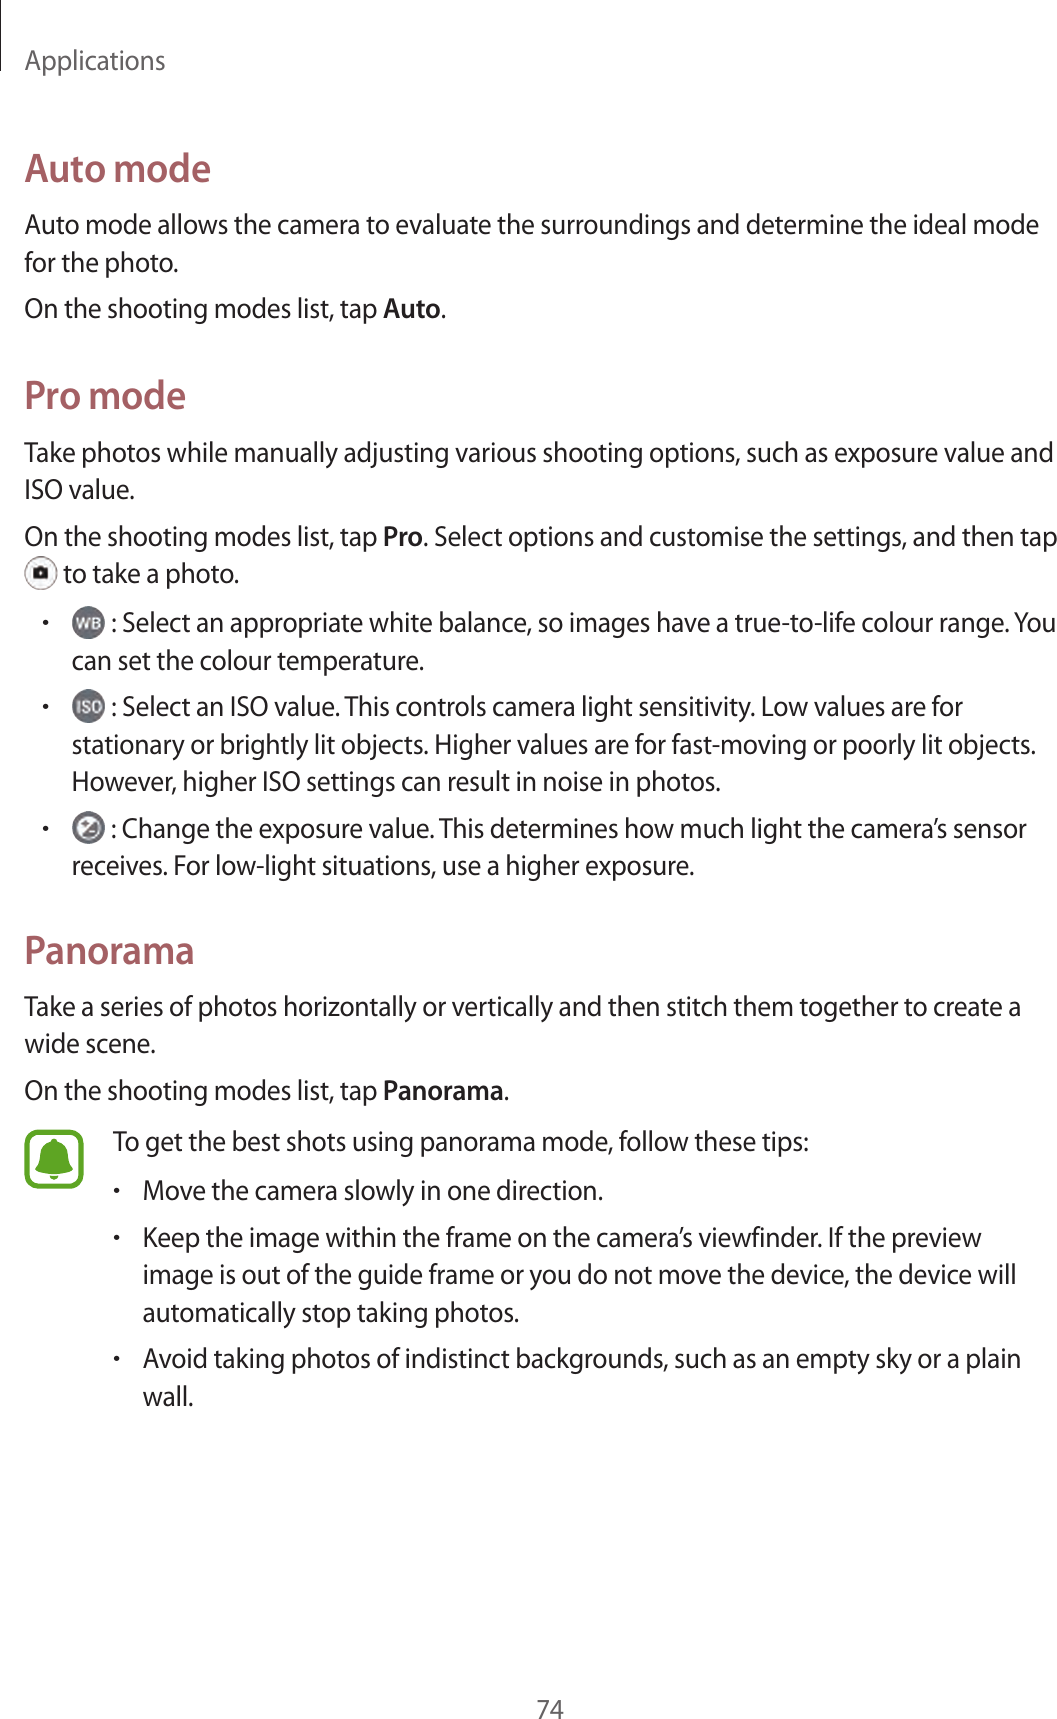 Applications74Auto modeAuto mode allows the camera to evaluate the surroundings and determine the ideal mode for the photo.On the shooting modes list, tap Auto.Pro modeTake photos while manually adjusting various shooting options, such as exposure value and ISO value.On the shooting modes list, tap Pro. Select options and customise the settings, and then tap  to take a photo.• : Select an appropriate white balance, so images have a true-to-life colour range. You can set the colour temperature.• : Select an ISO value. This controls camera light sensitivity. Low values are for stationary or brightly lit objects. Higher values are for fast-moving or poorly lit objects. However, higher ISO settings can result in noise in photos.• : Change the exposure value. This determines how much light the camera’s sensor receives. For low-light situations, use a higher exposure.PanoramaTake a series of photos horizontally or vertically and then stitch them together to create a wide scene.On the shooting modes list, tap Panorama.To get the best shots using panorama mode, follow these tips:•Move the camera slowly in one direction.•Keep the image within the frame on the camera’s viewfinder. If the preview image is out of the guide frame or you do not move the device, the device will automatically stop taking photos.•Avoid taking photos of indistinct backgrounds, such as an empty sky or a plain wall.